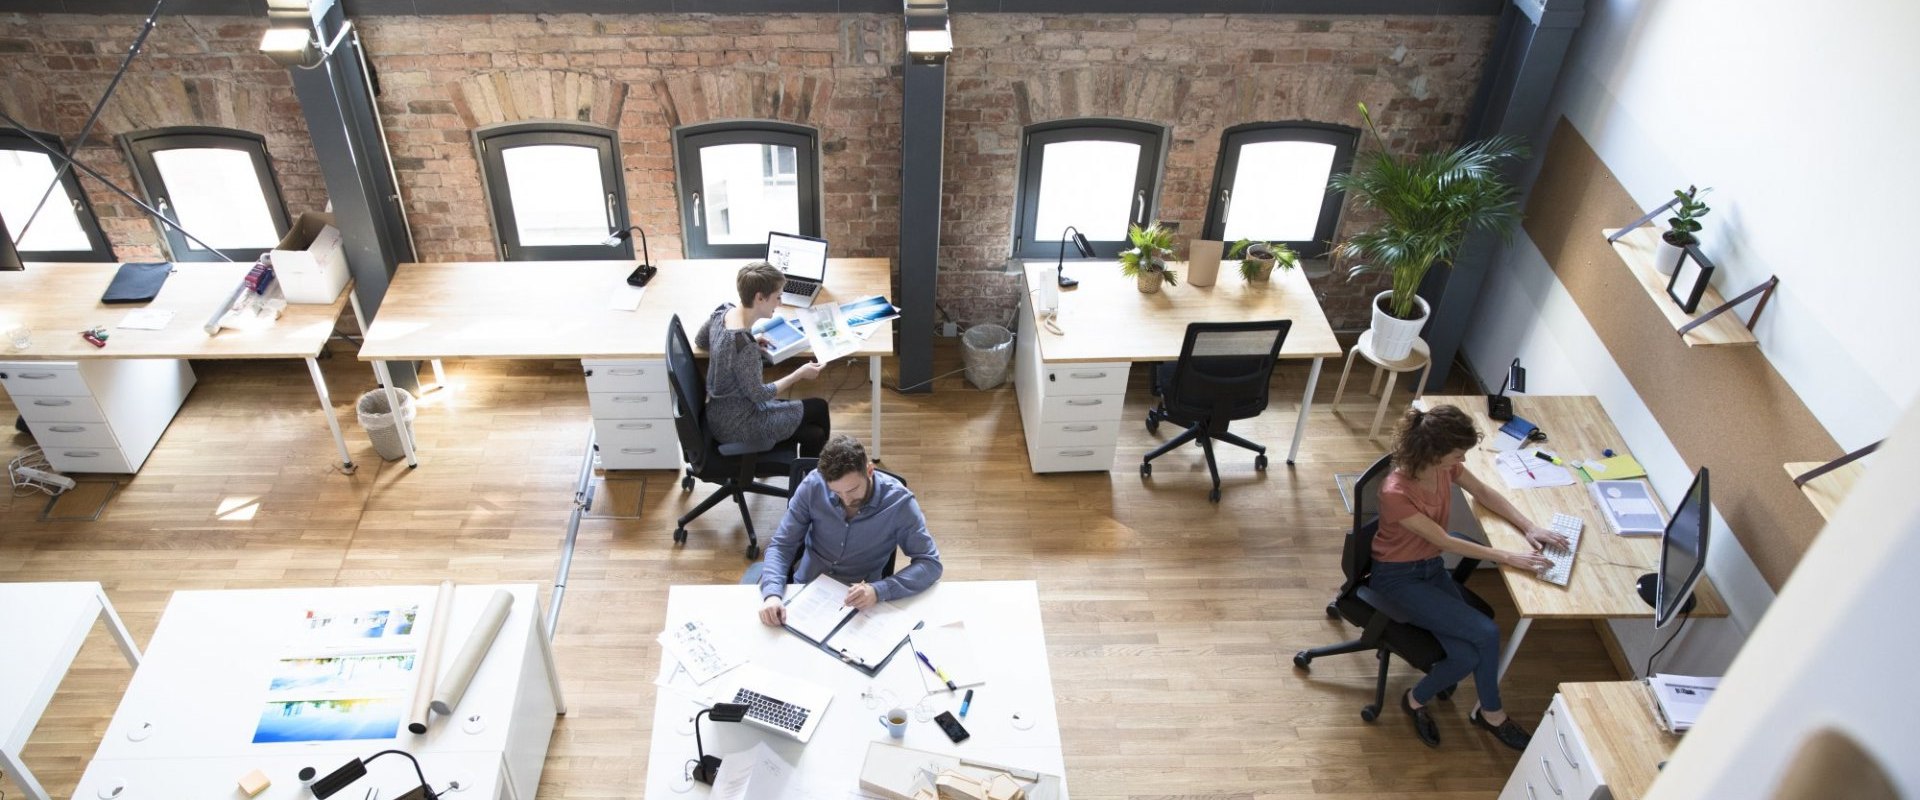 Is a co working space the same as an office space?